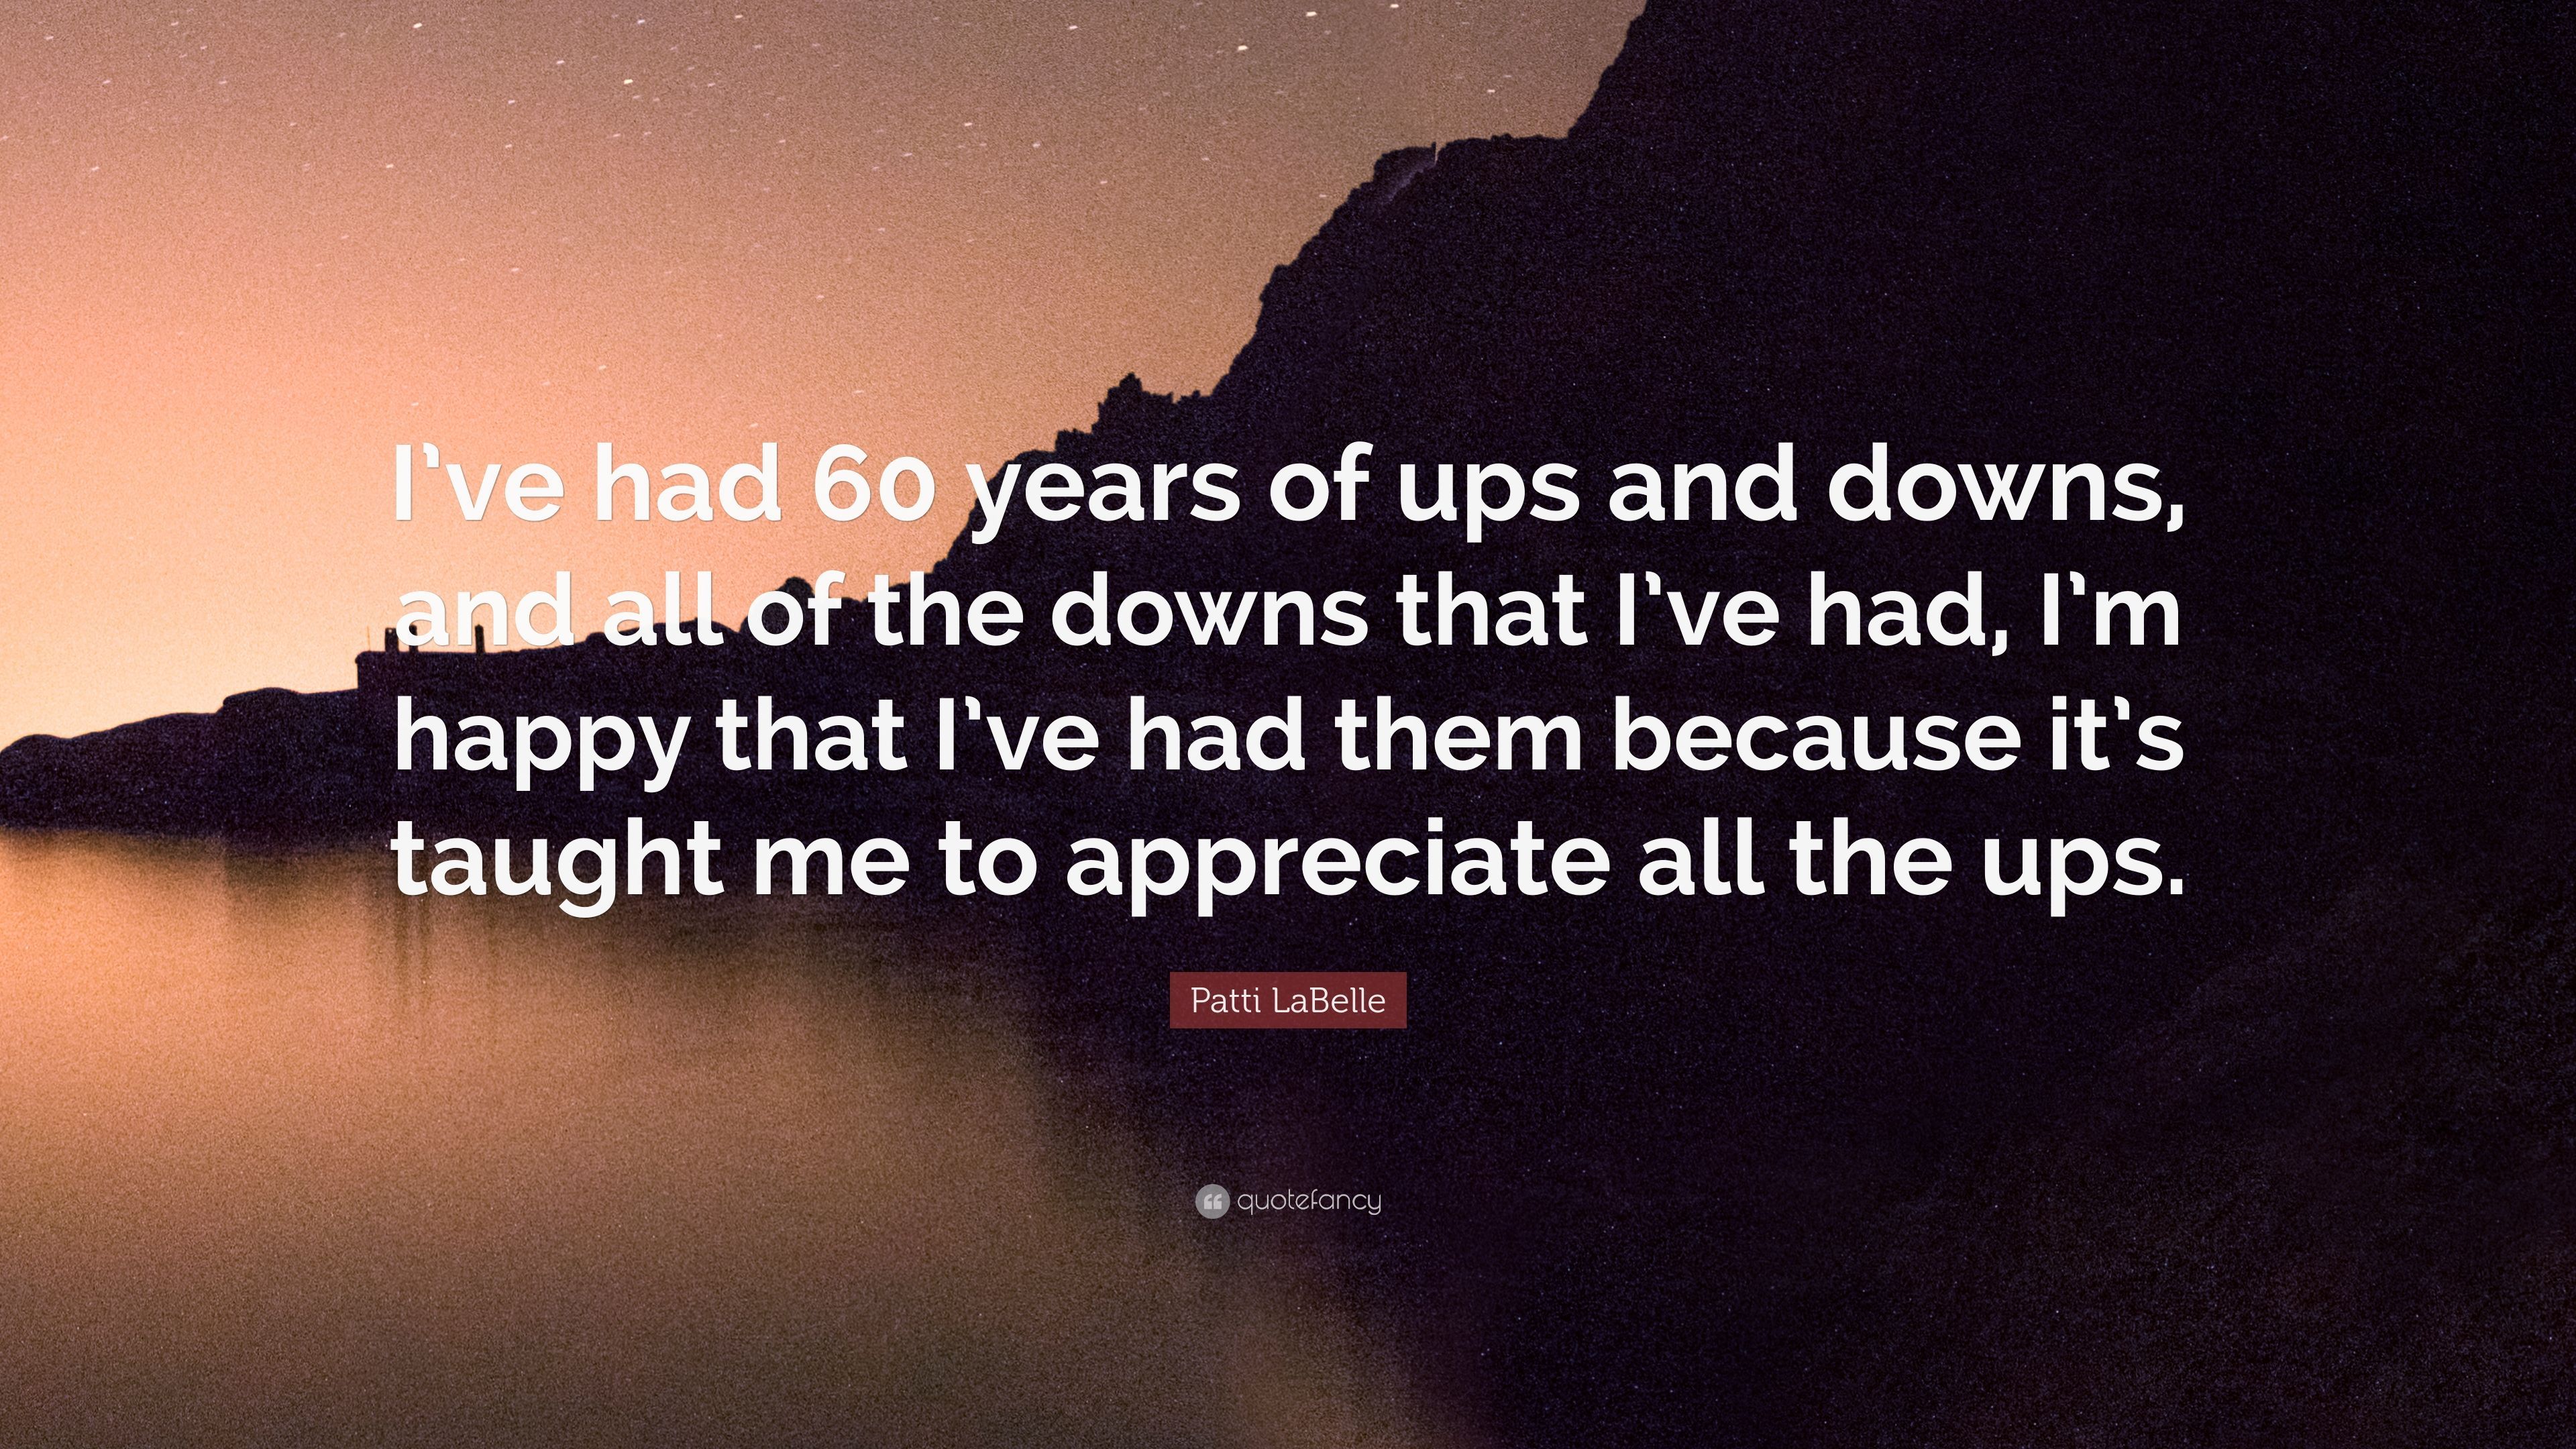 Patti LaBelle Quote: “I've had 60 years of ups and downs